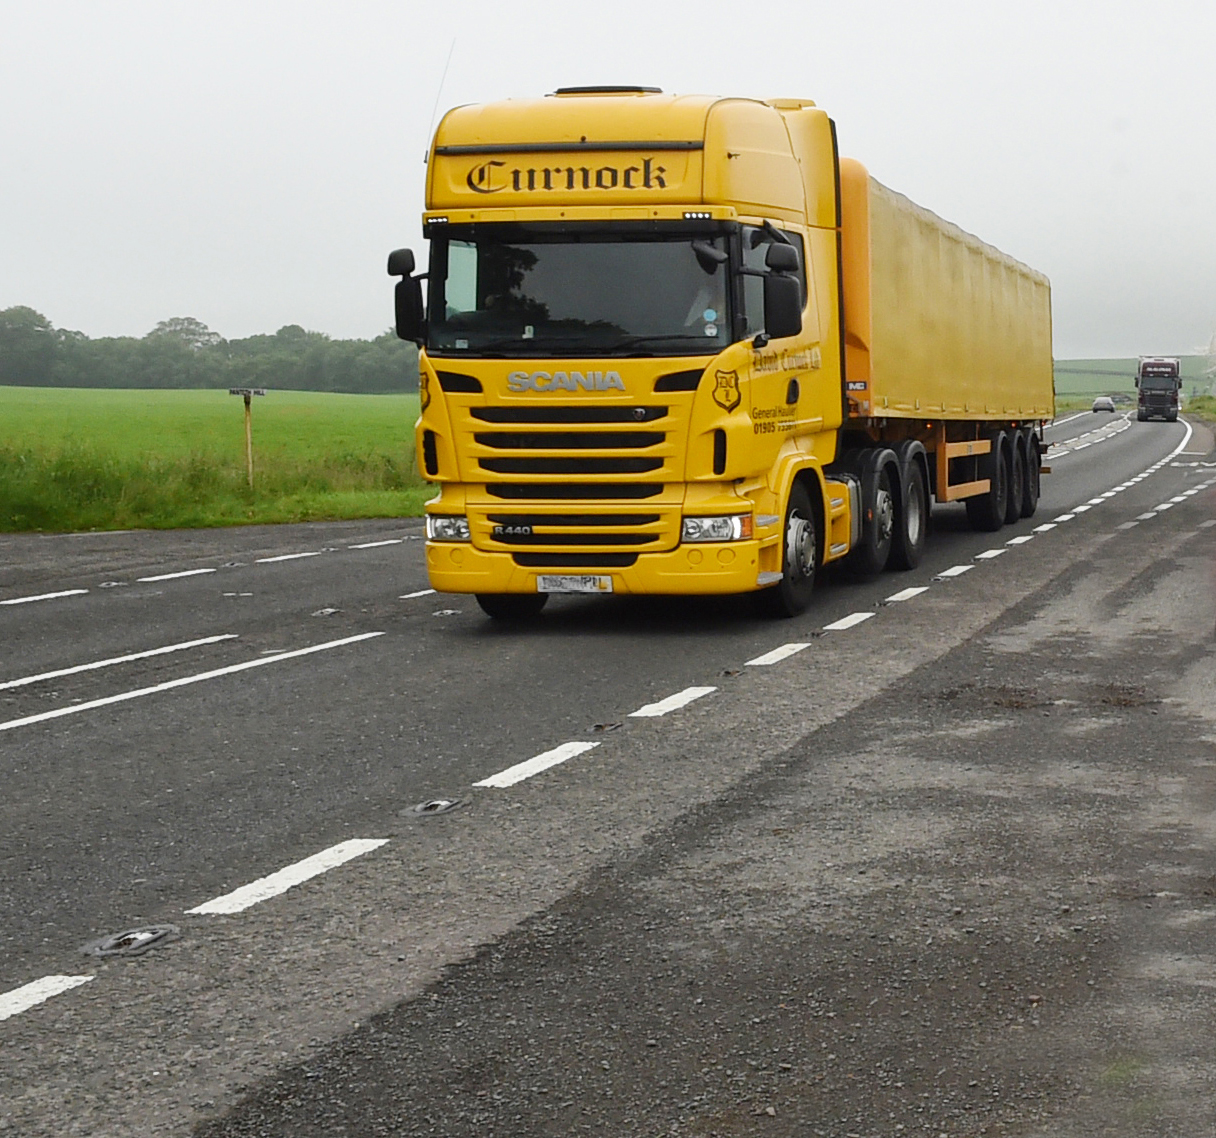 Lorry queues could be reality for A75